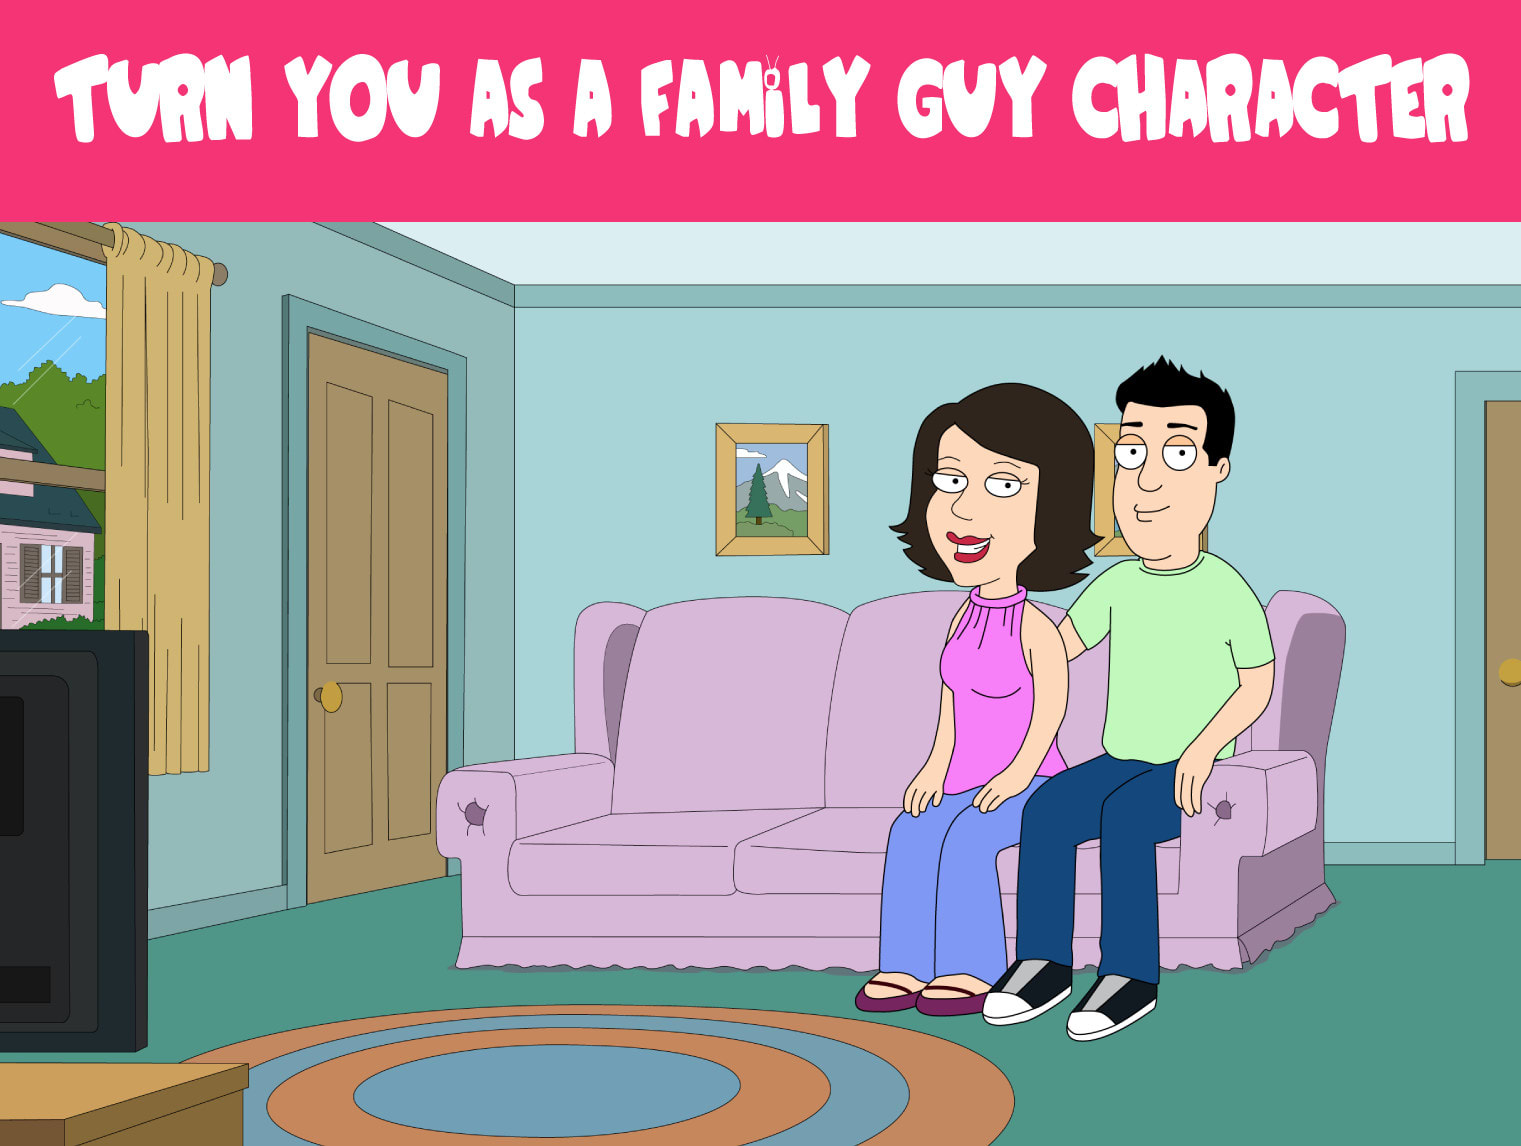 How to draw characters from family guy